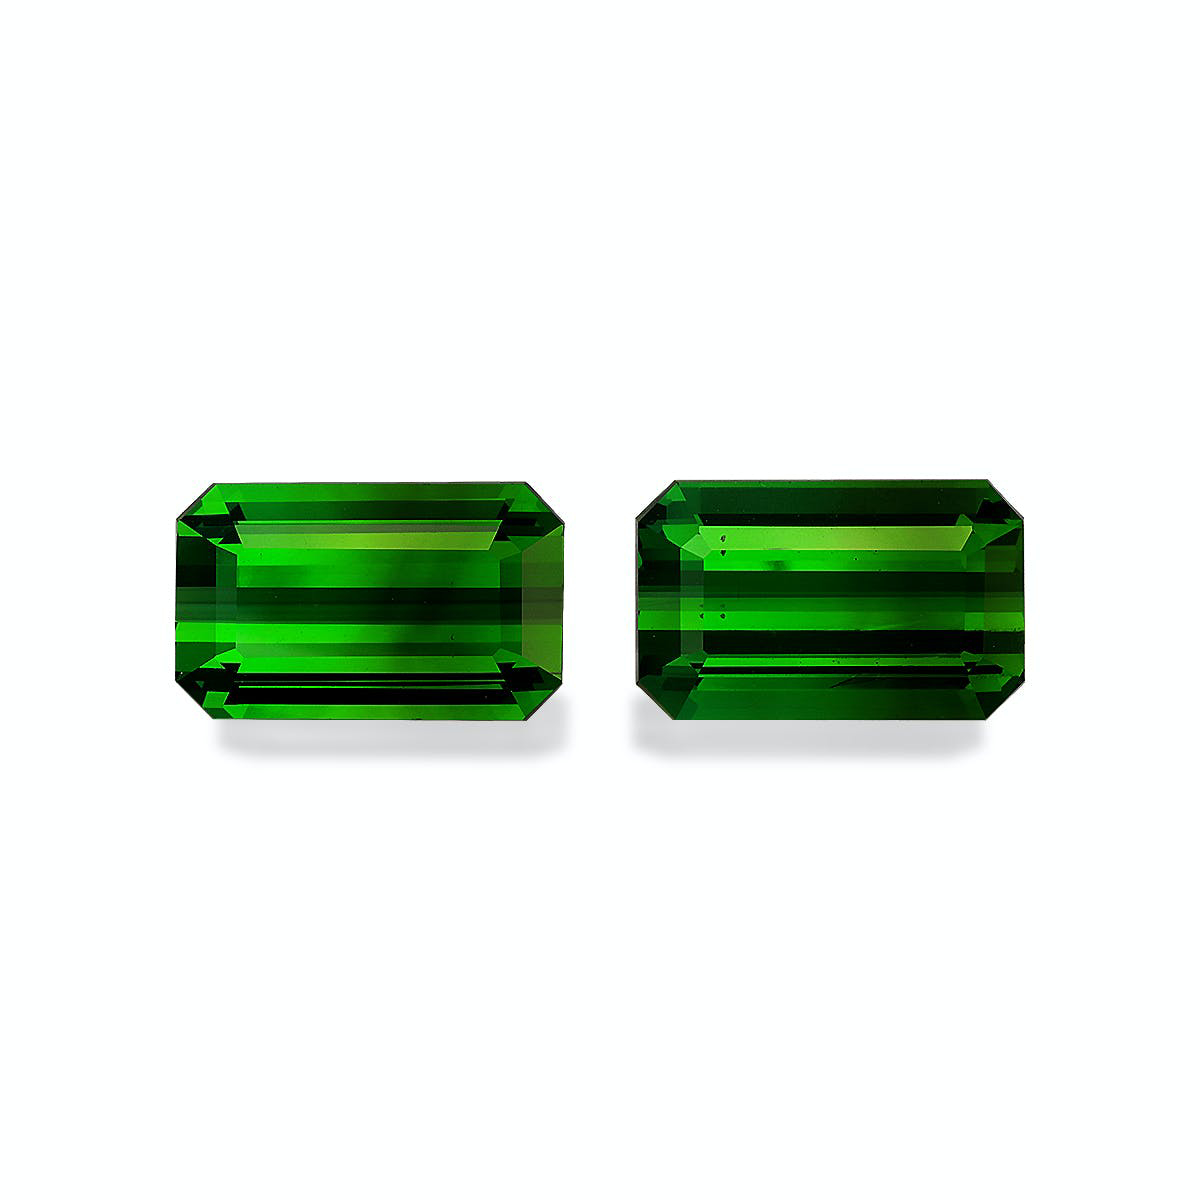 Picture of Basil Green Tourmaline 13.96ct - Pair (TG1129)